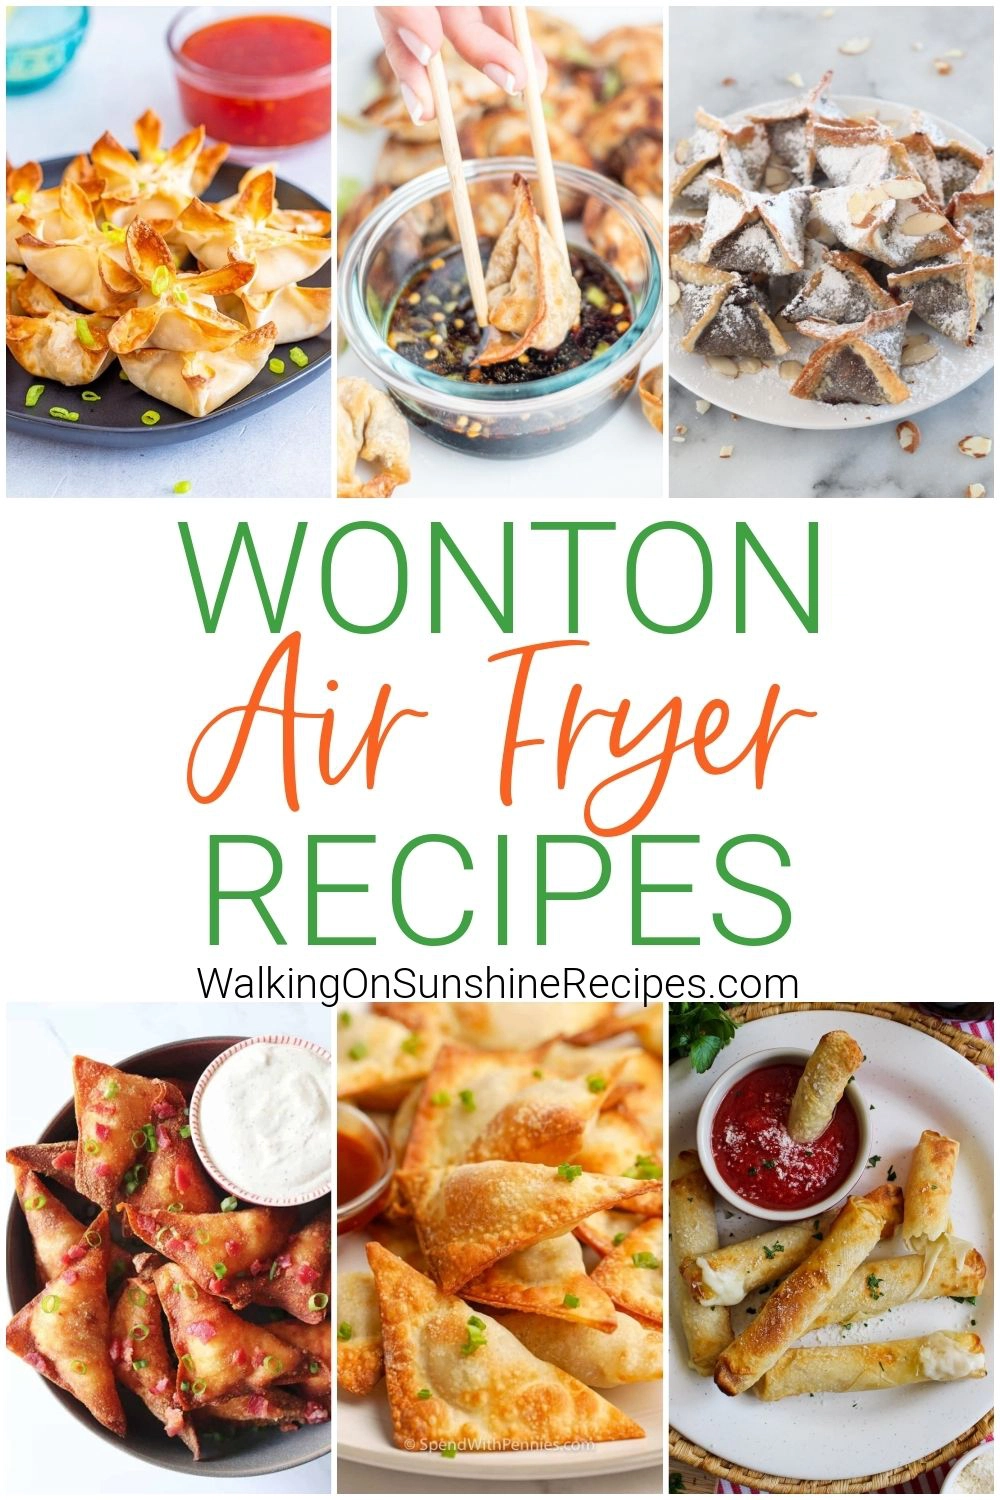 Air Fryer Recipes Using Wonton Wrappers.